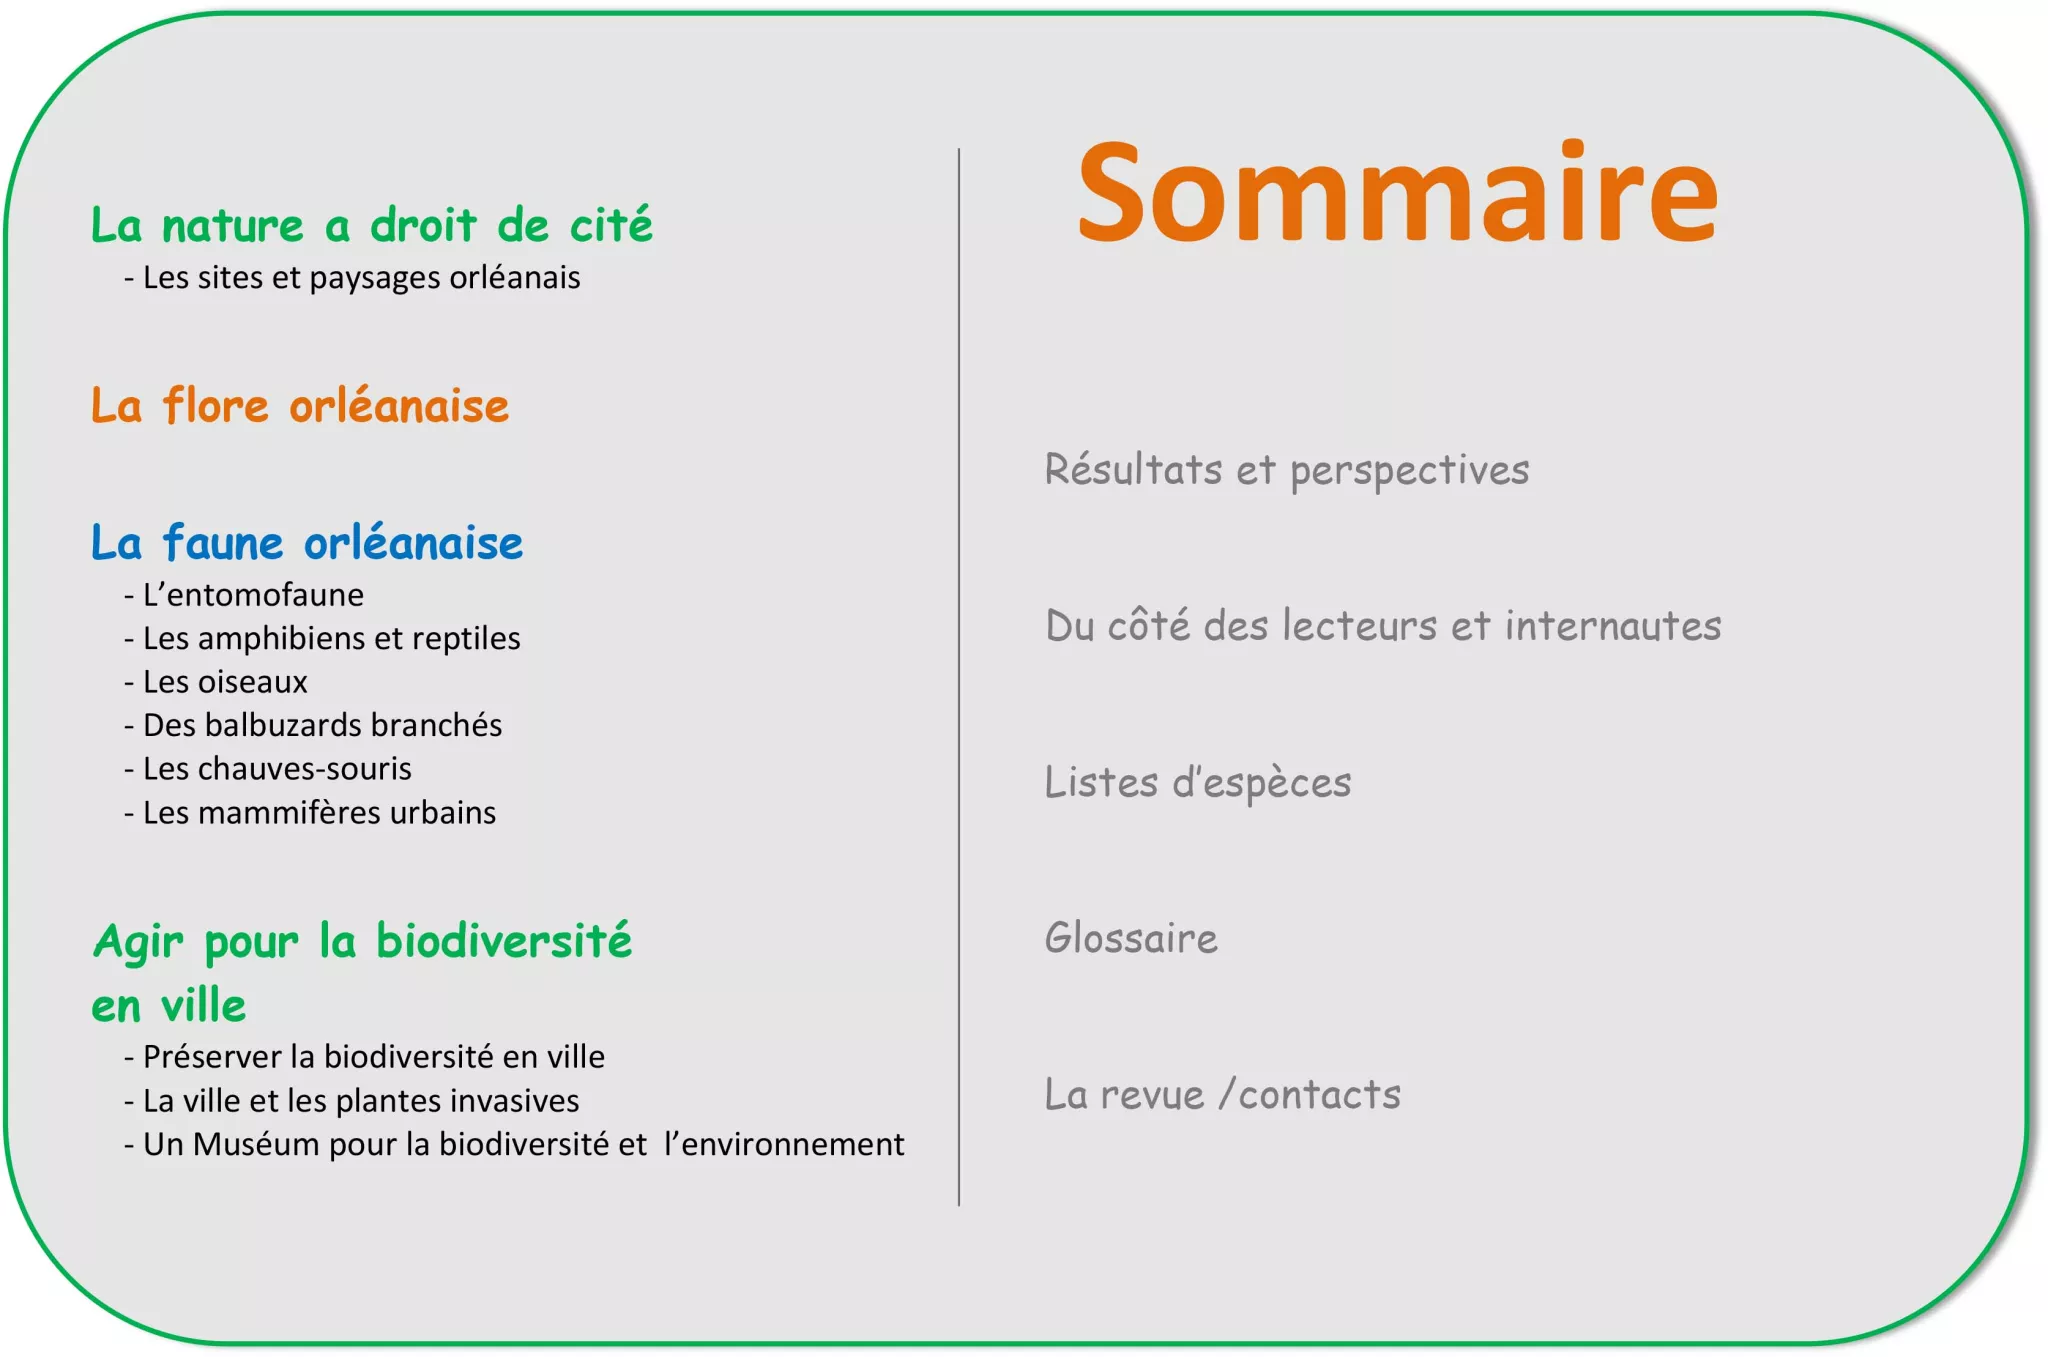 Sommaire RN 2